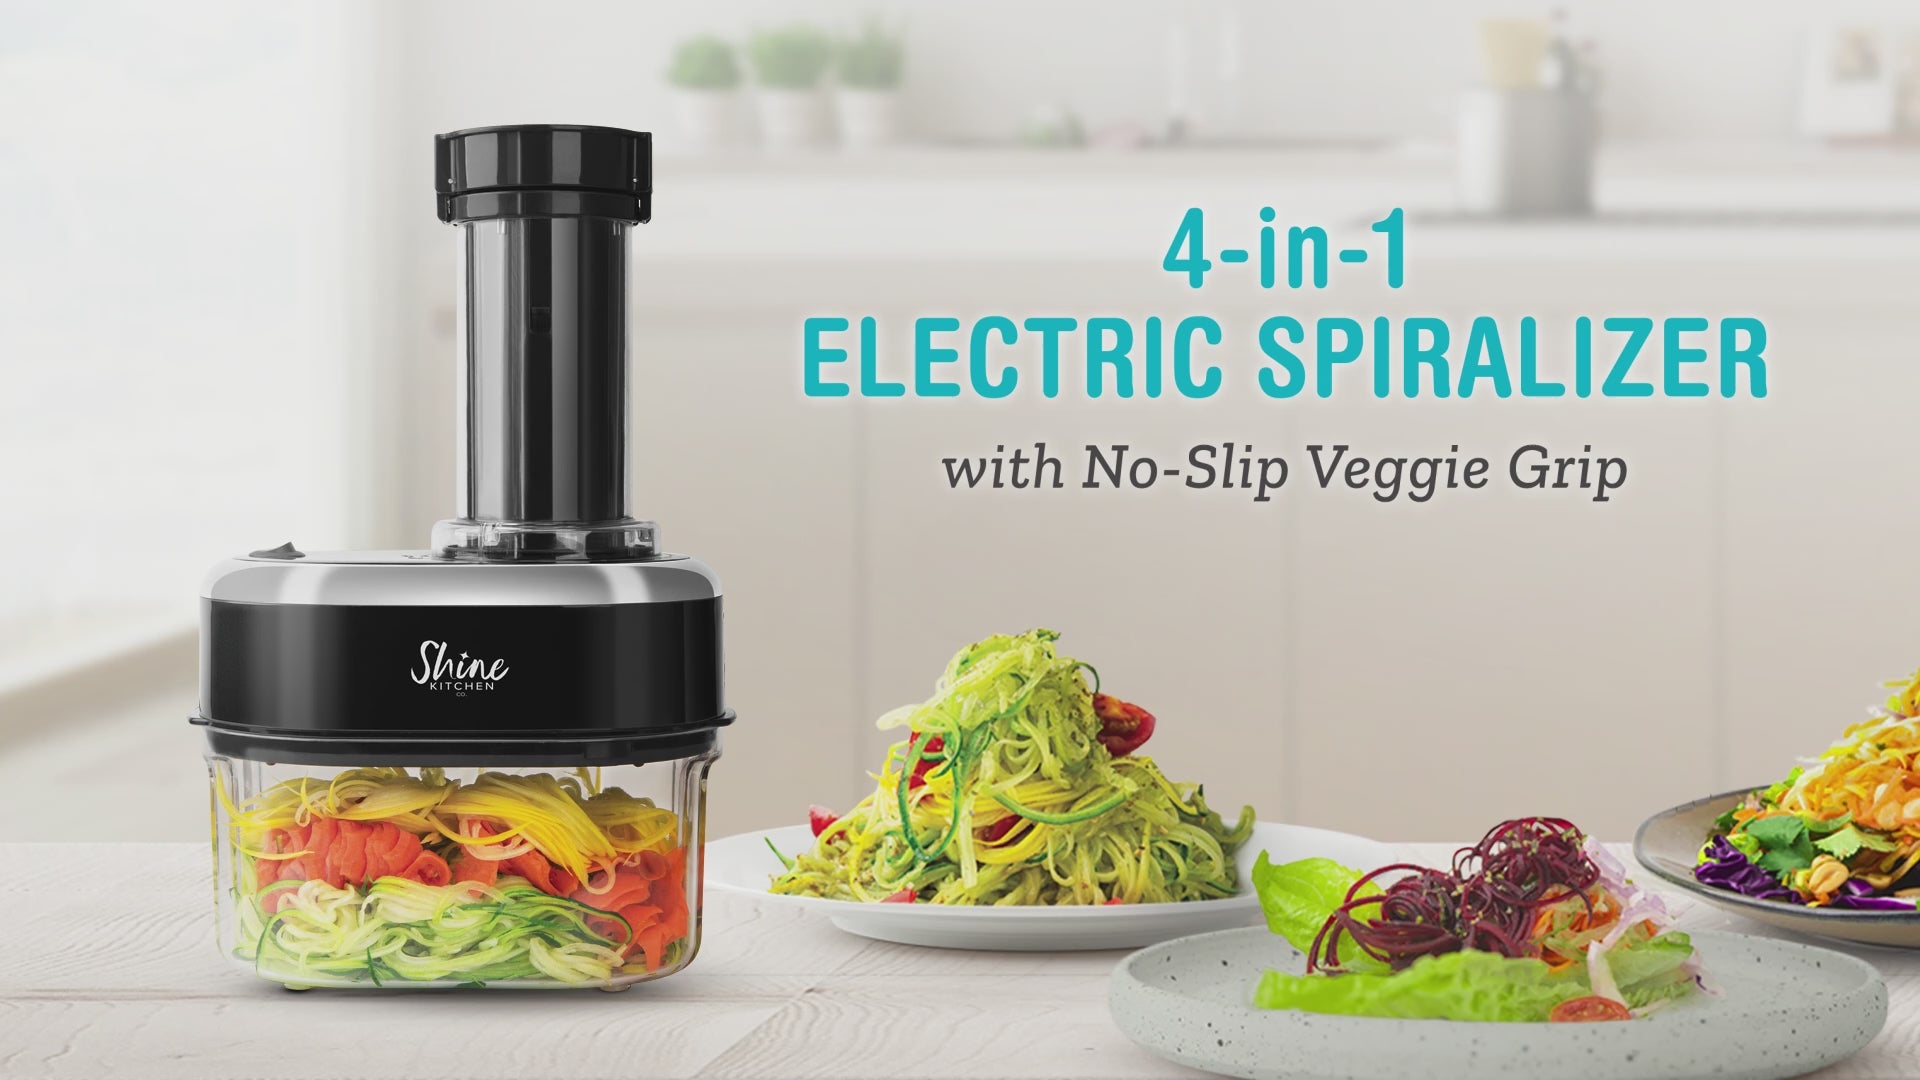 NEW Black Oster Electric SPIRALIZER Easy to Use. Spiralize Veggies